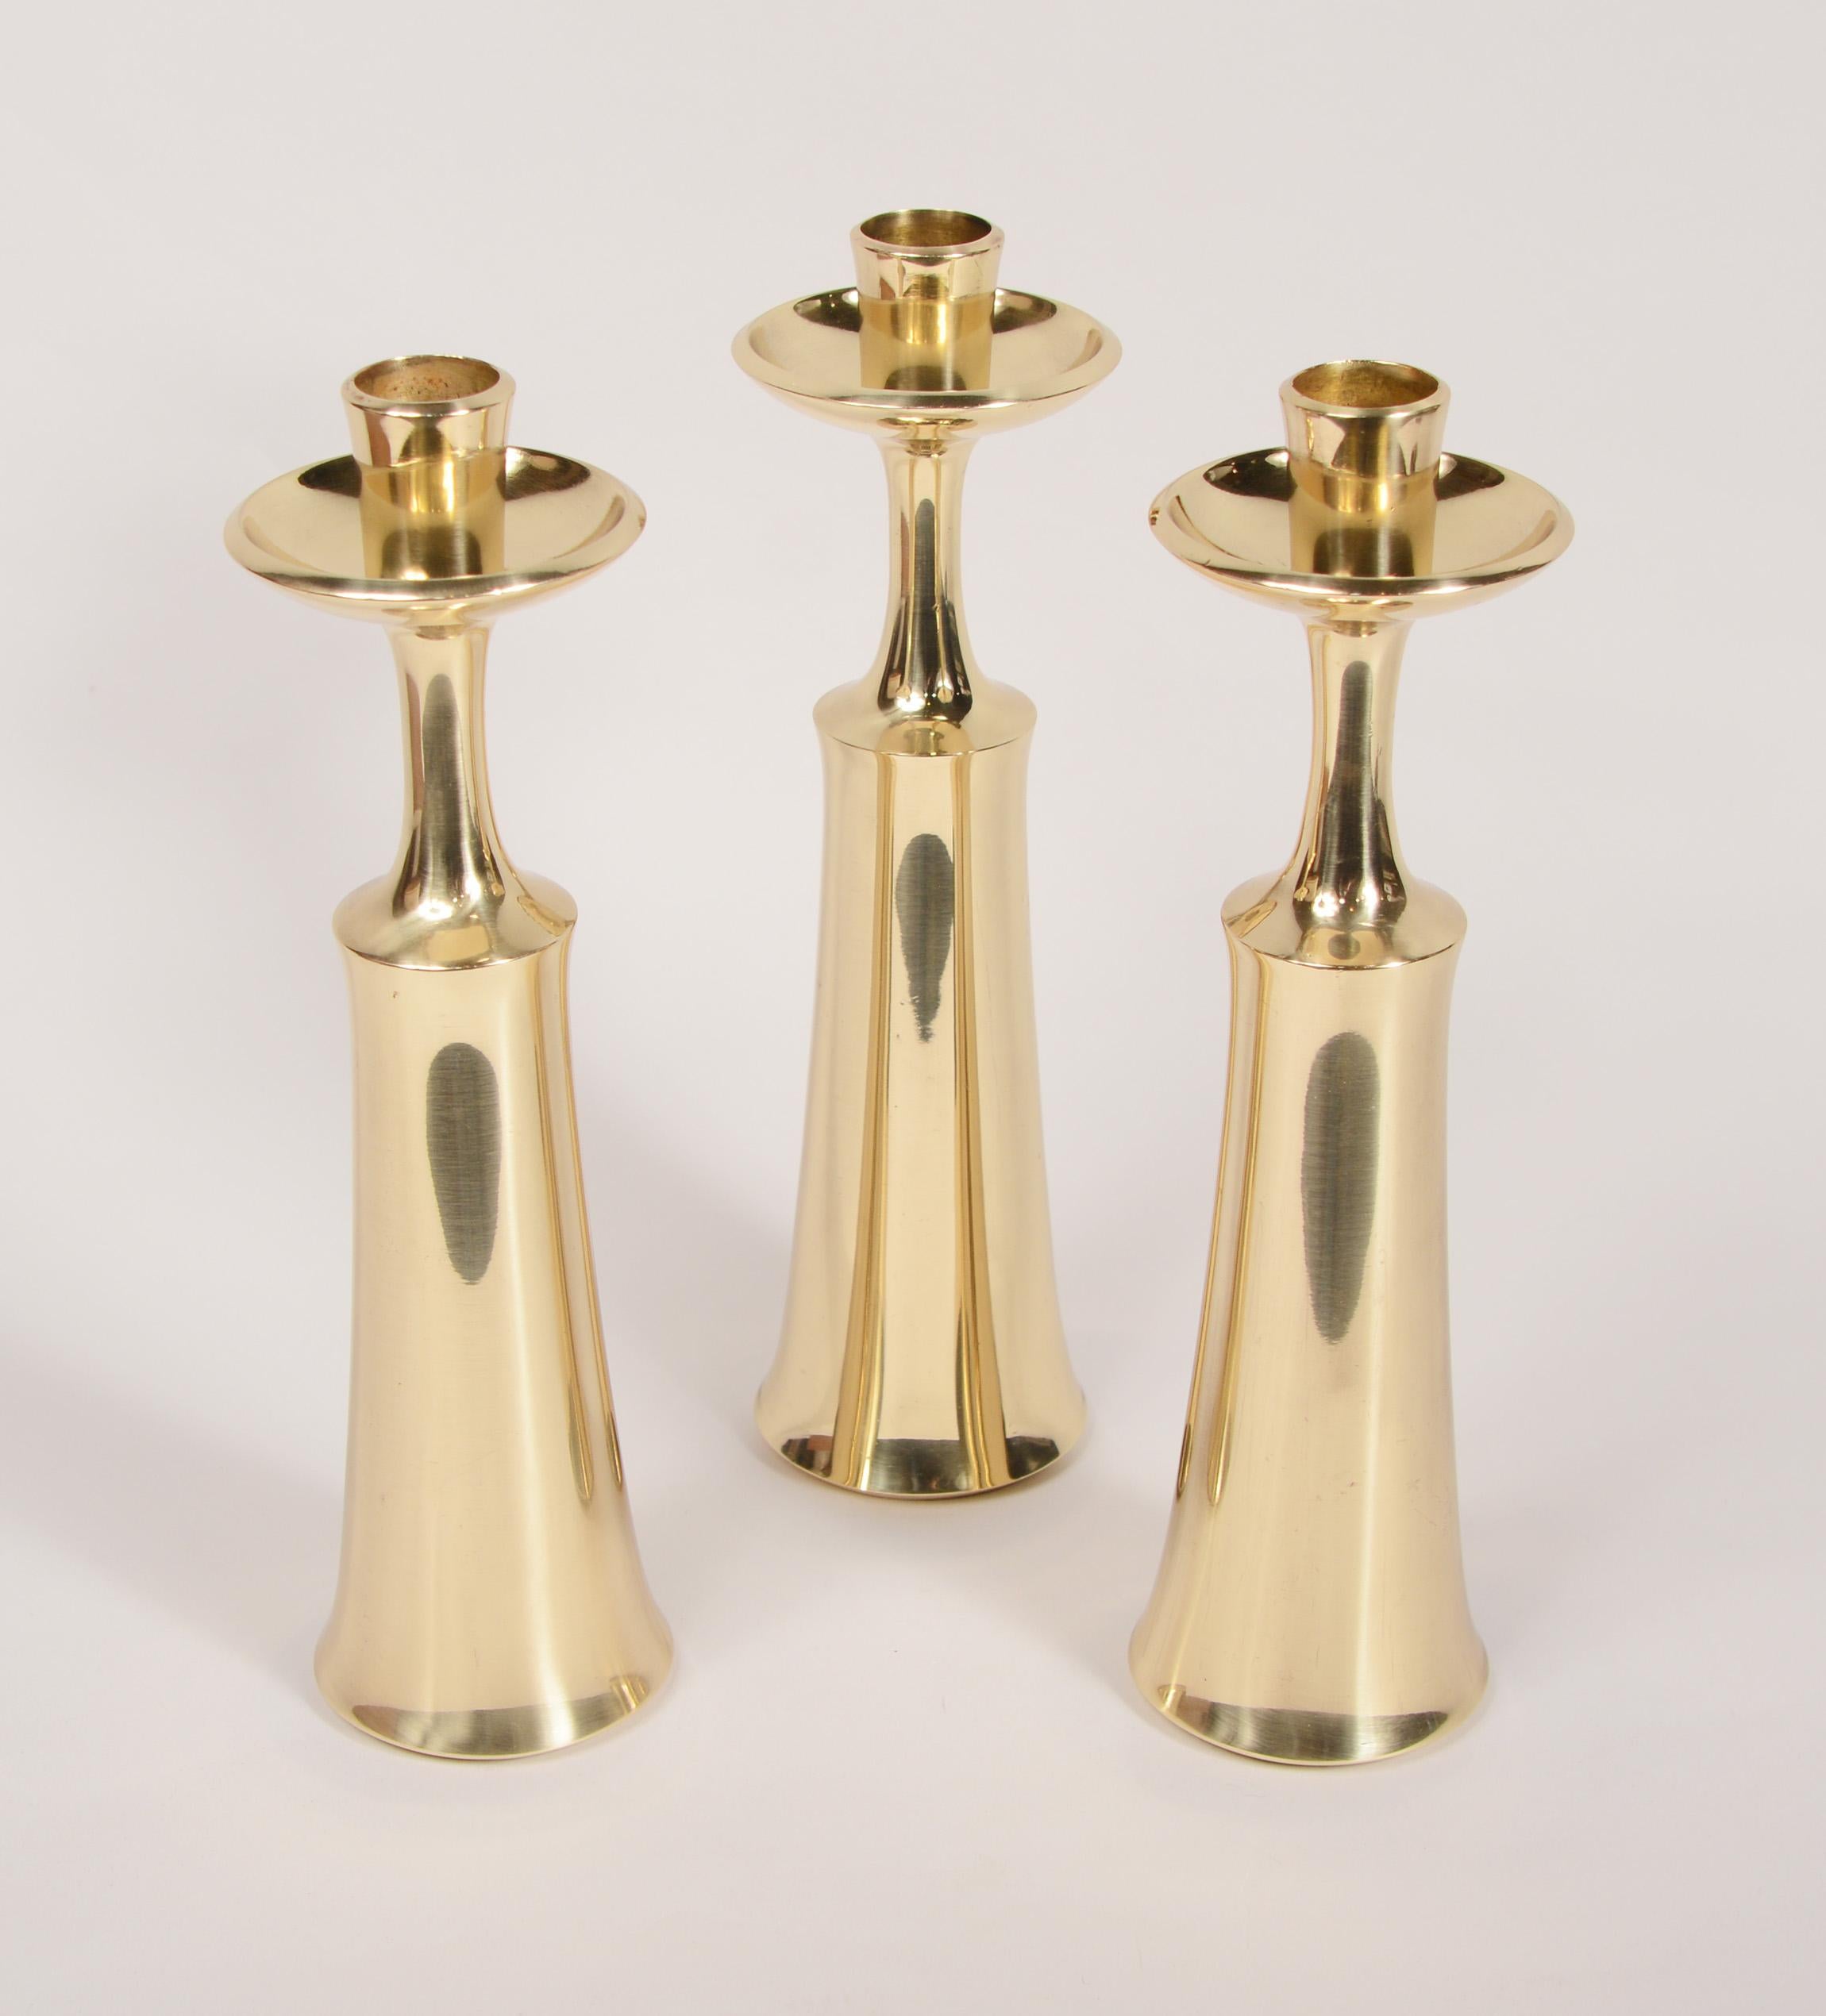 20th Century Three Dansk Polished Brass Candle Holders by Jens Quistgaard For Sale